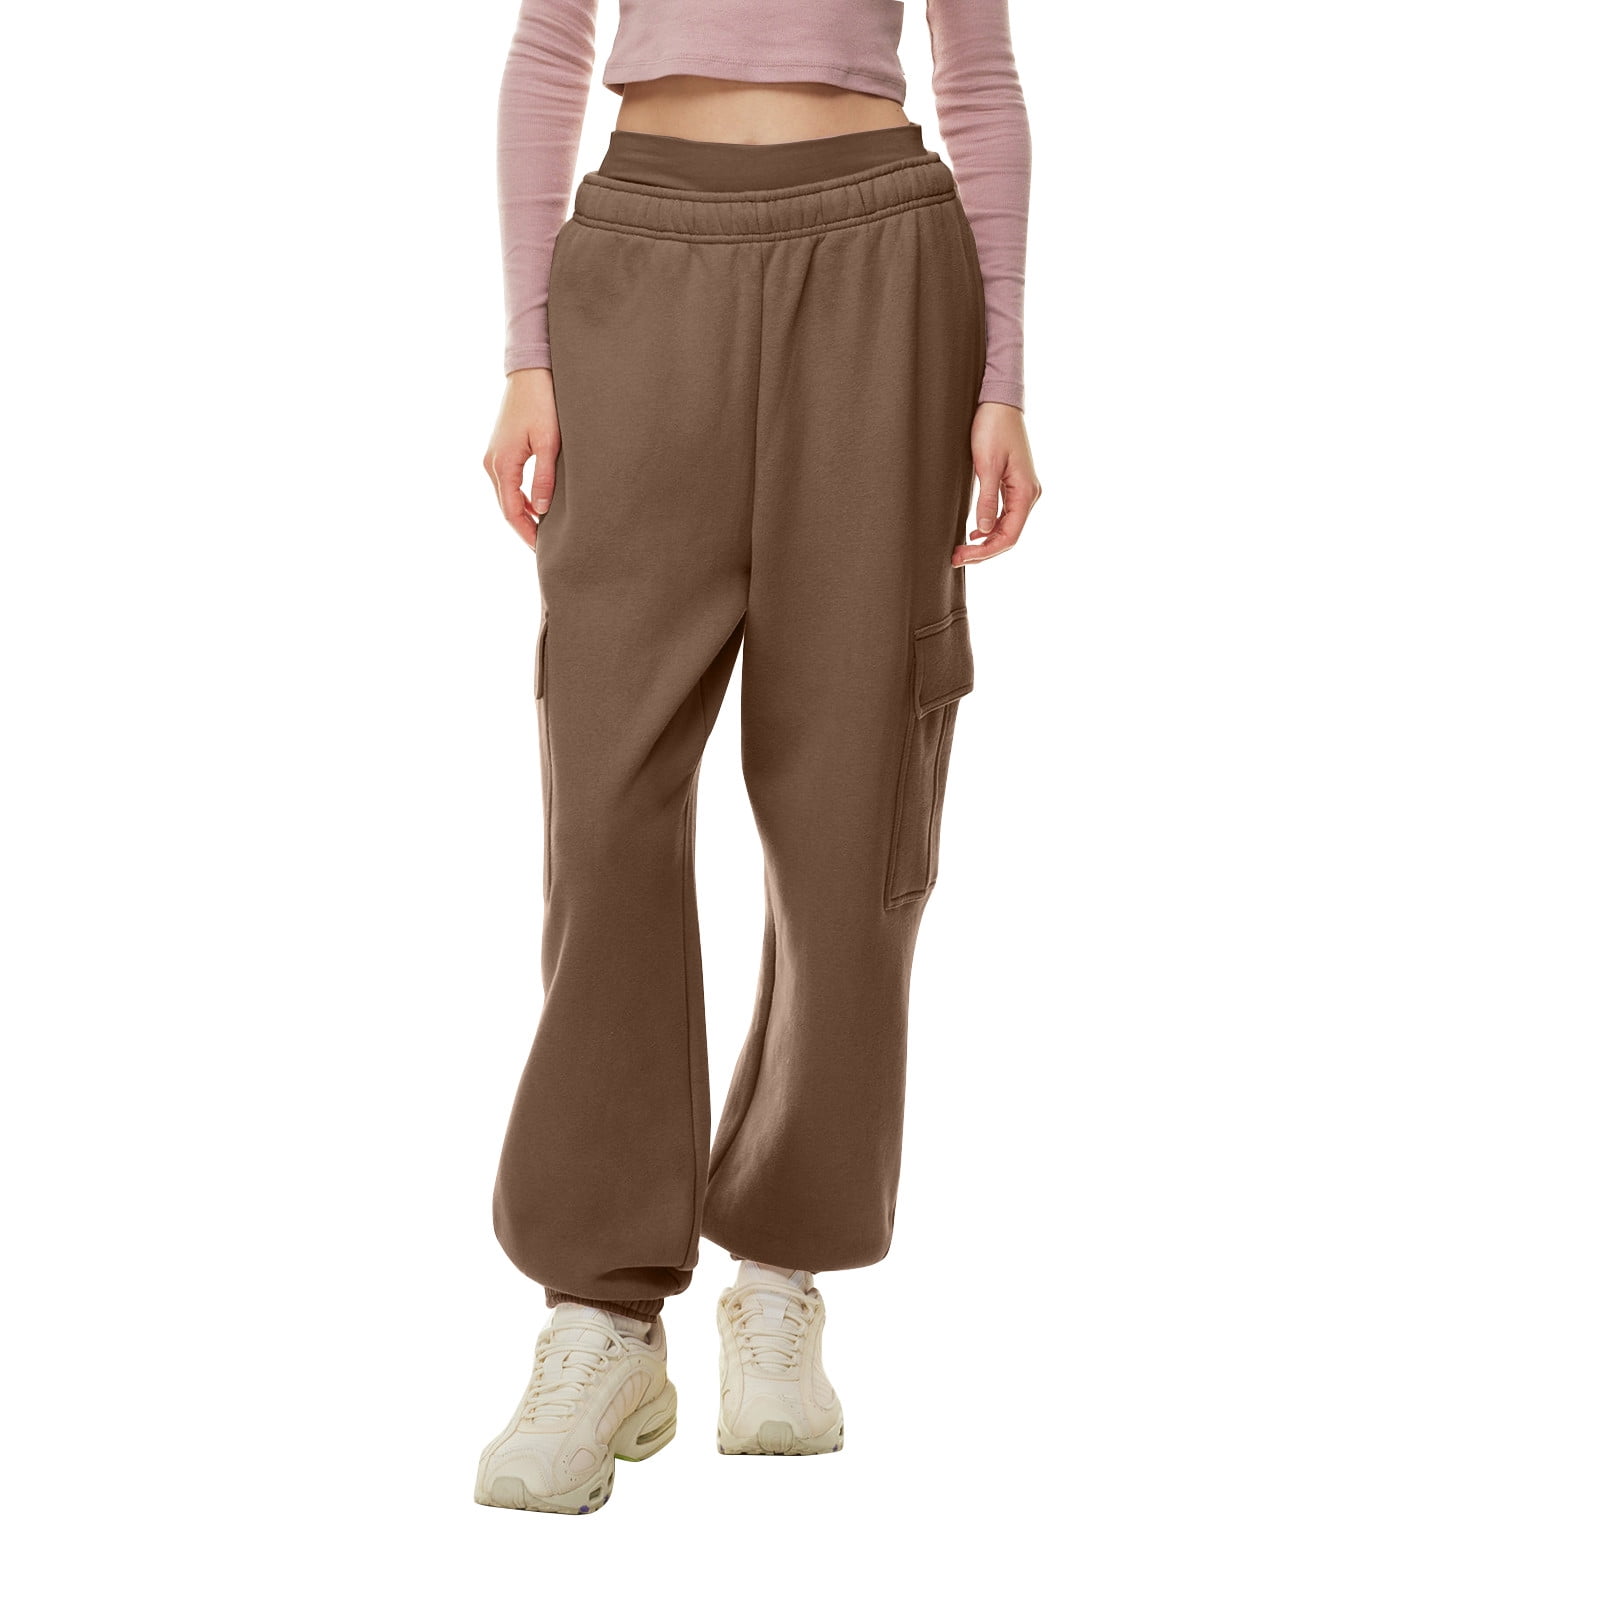 Qcmgmg Cargo Sweatpants for Women with Pockets Baggy High Waist